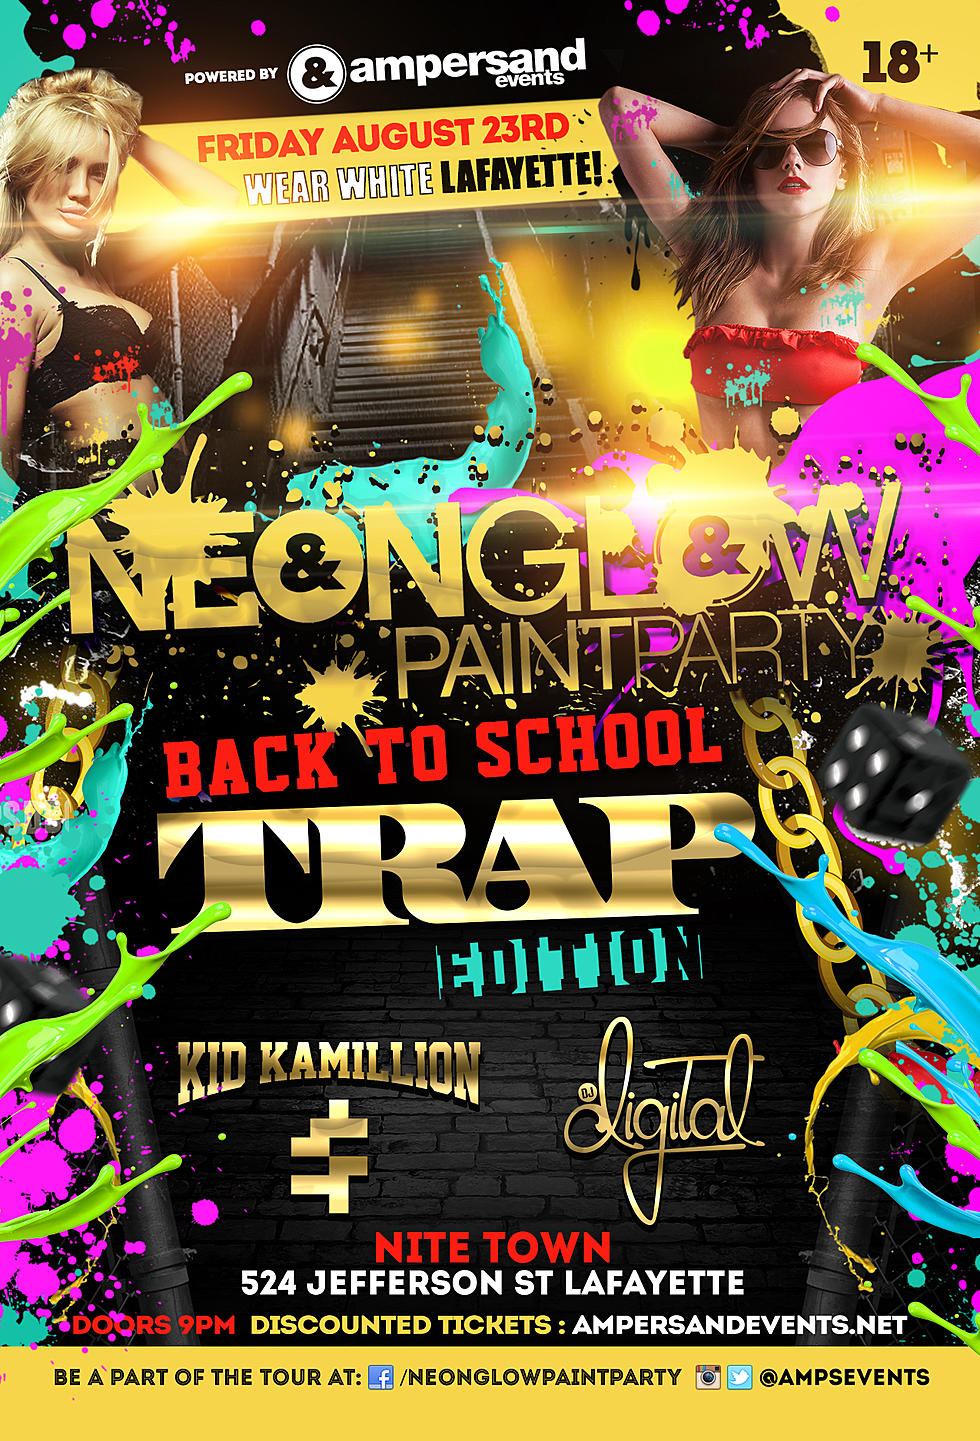 NeonGLOW Paint Party Tour Returns To Lafayette With ‘Back To School Trap Edition’ At Nite Town